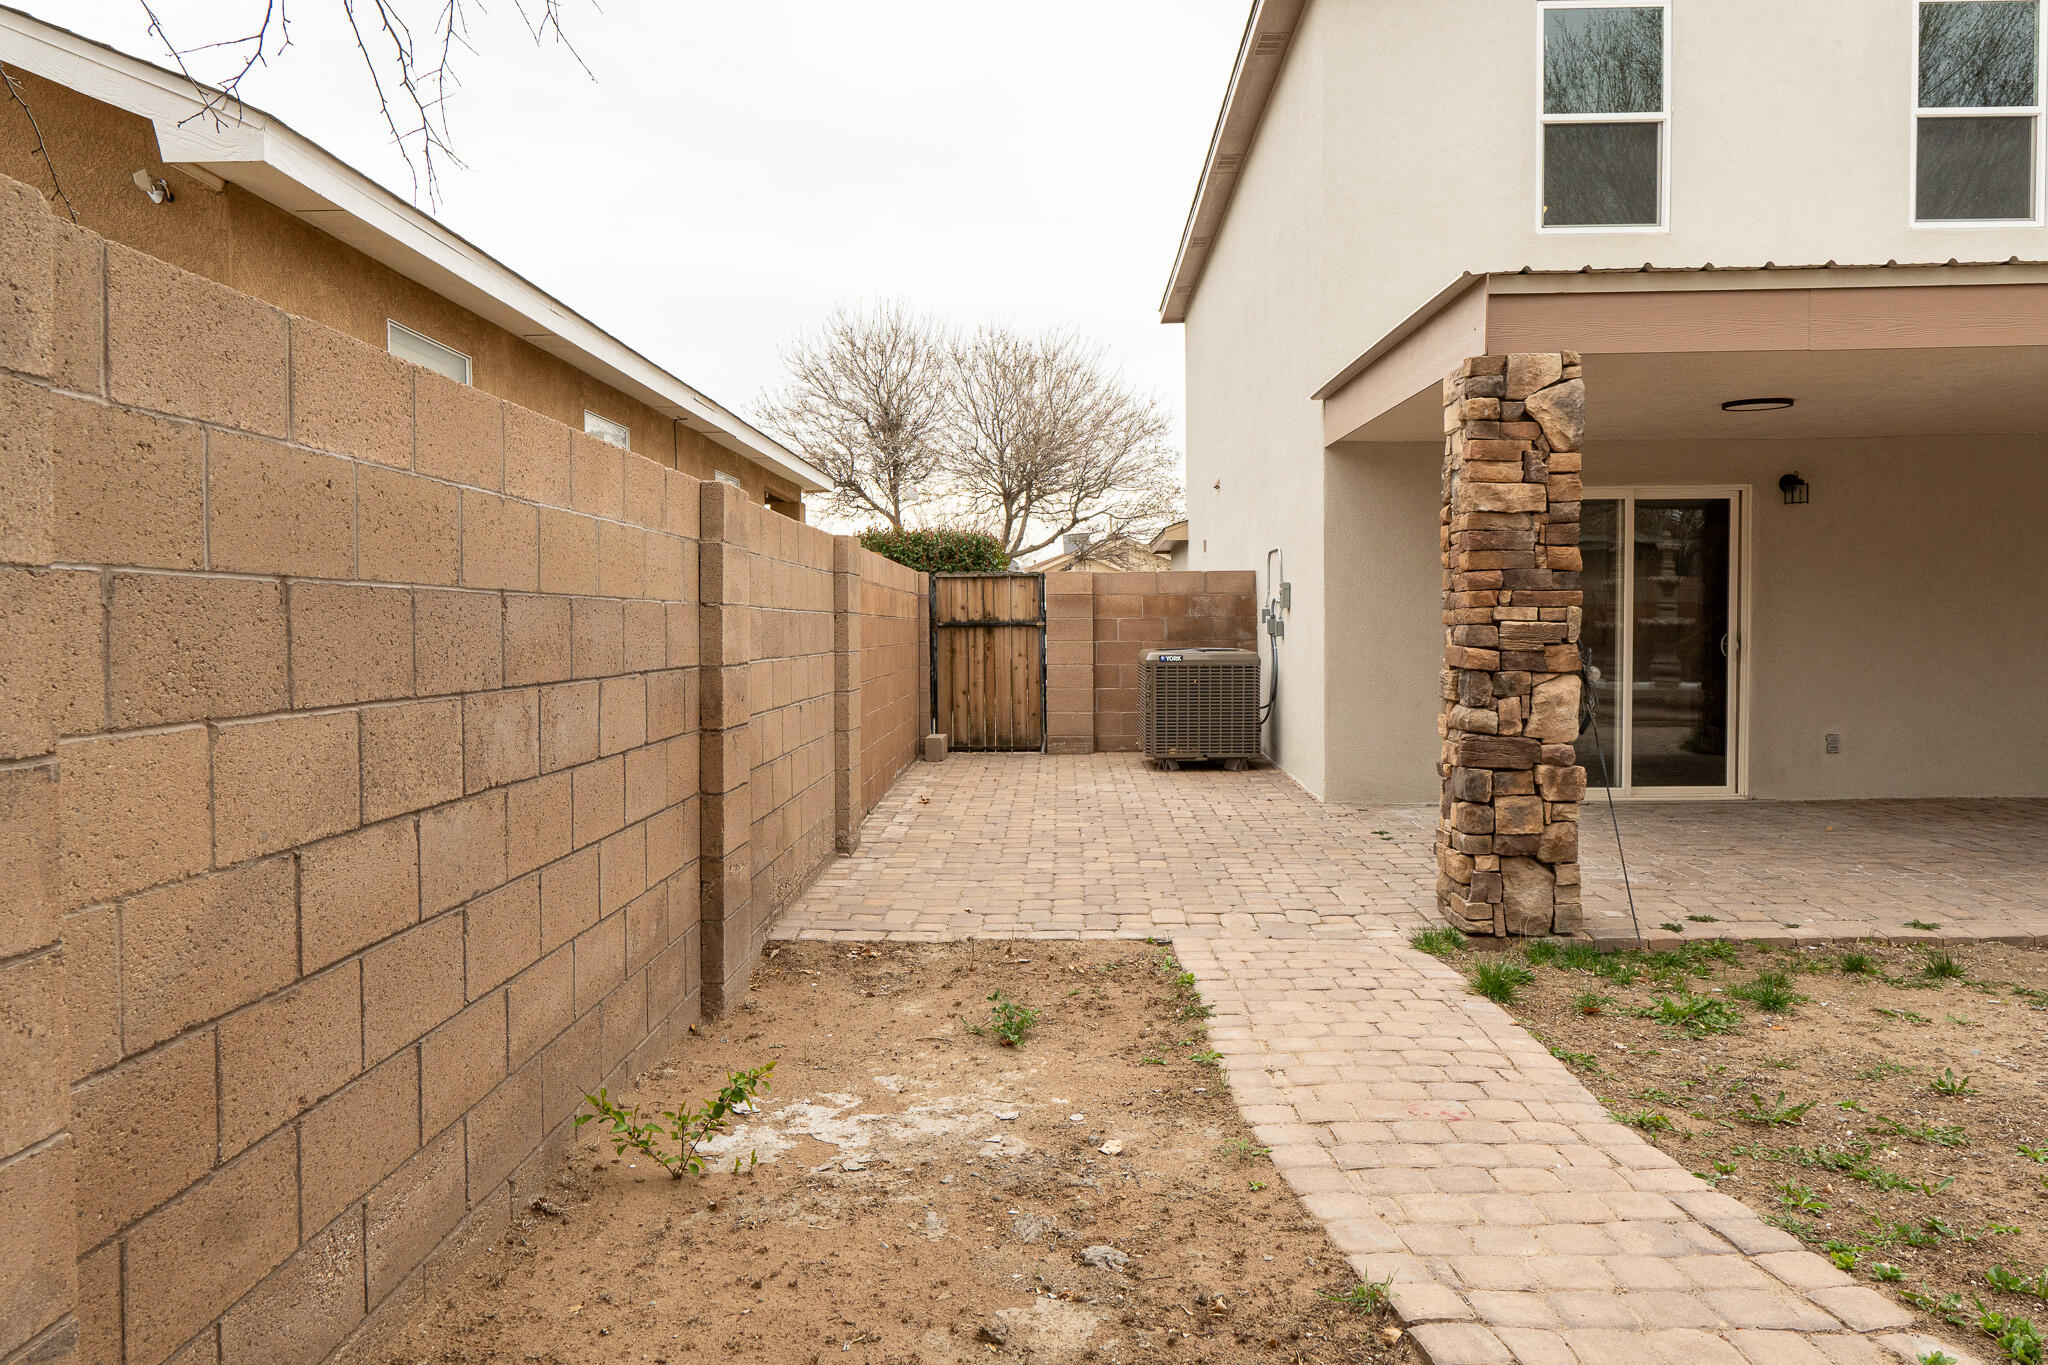 10501 Safford Place NW, Albuquerque, New Mexico 87114, 3 Bedrooms Bedrooms, ,3 BathroomsBathrooms,Residential,For Sale,10501 Safford Place NW,1059519